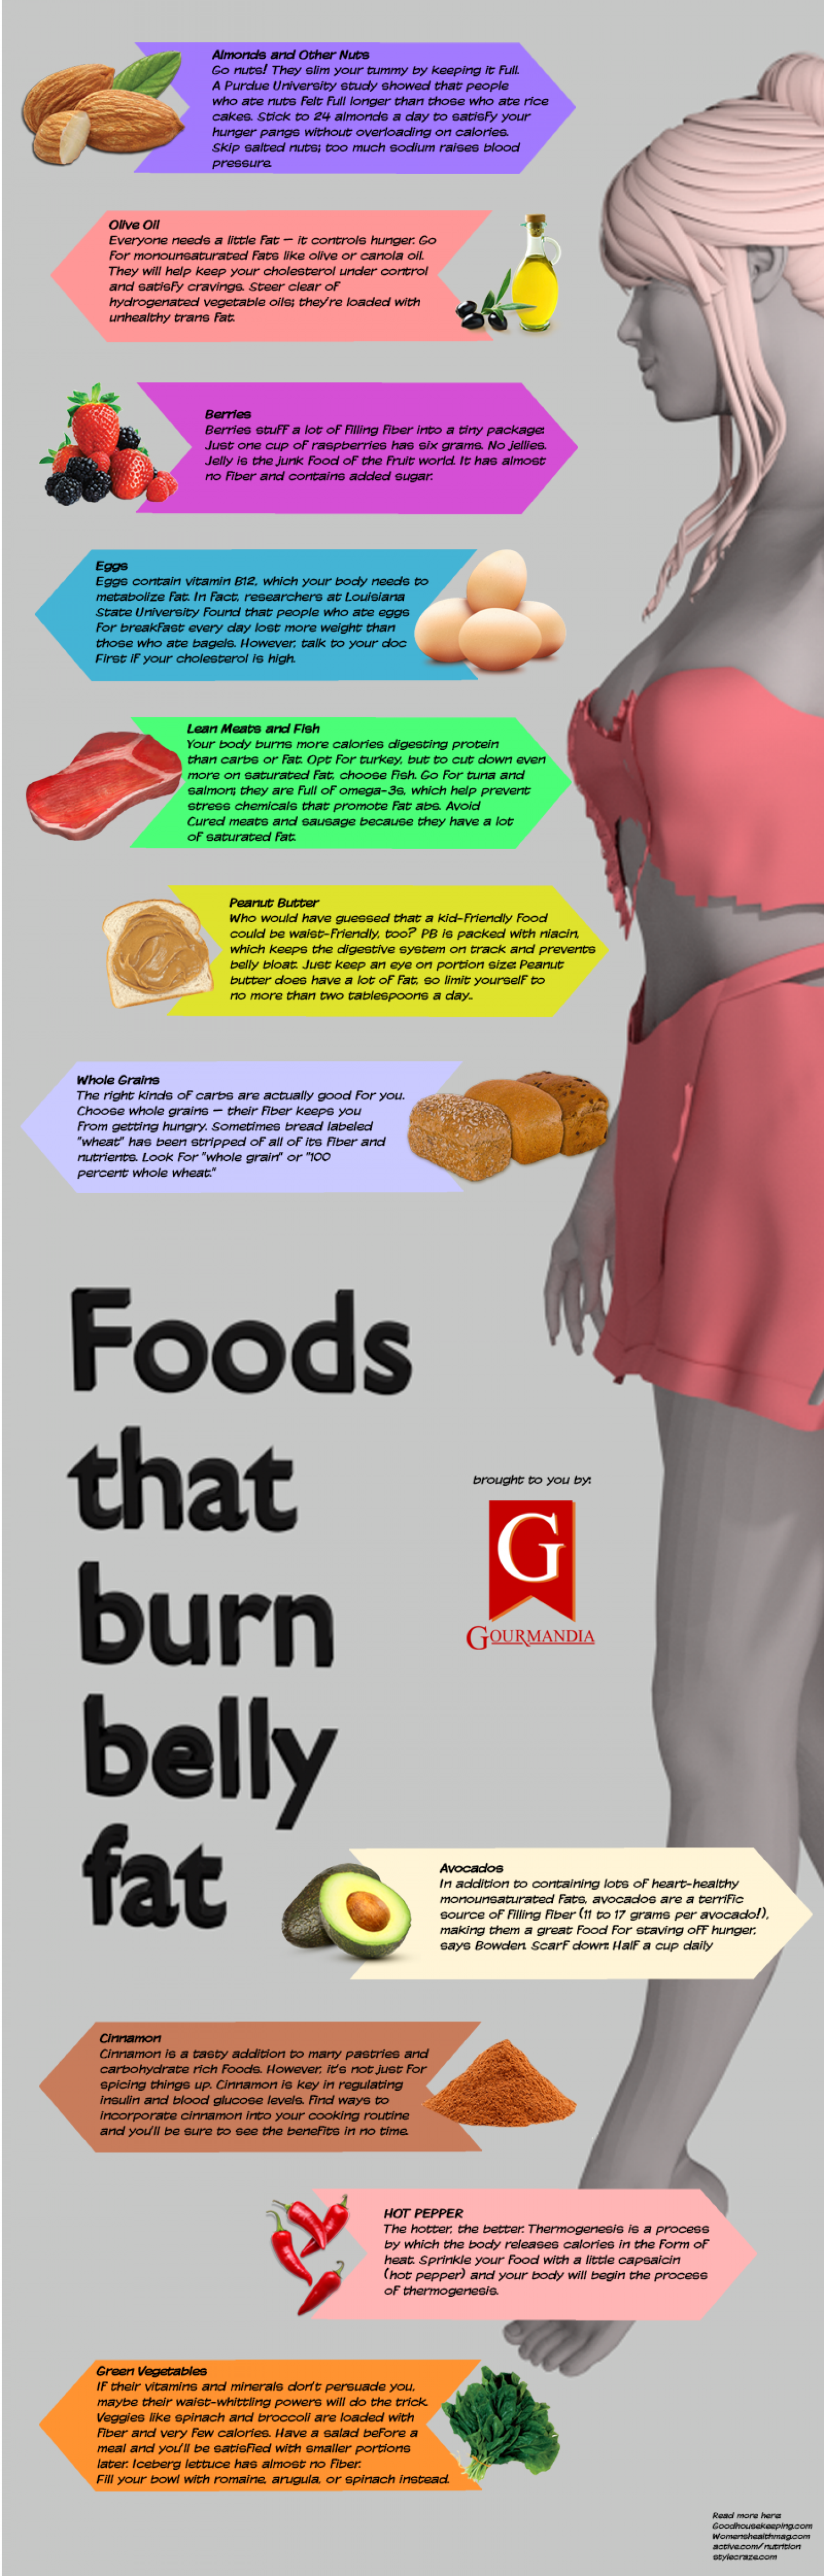 Foods that Burn Belly Fat Infographic